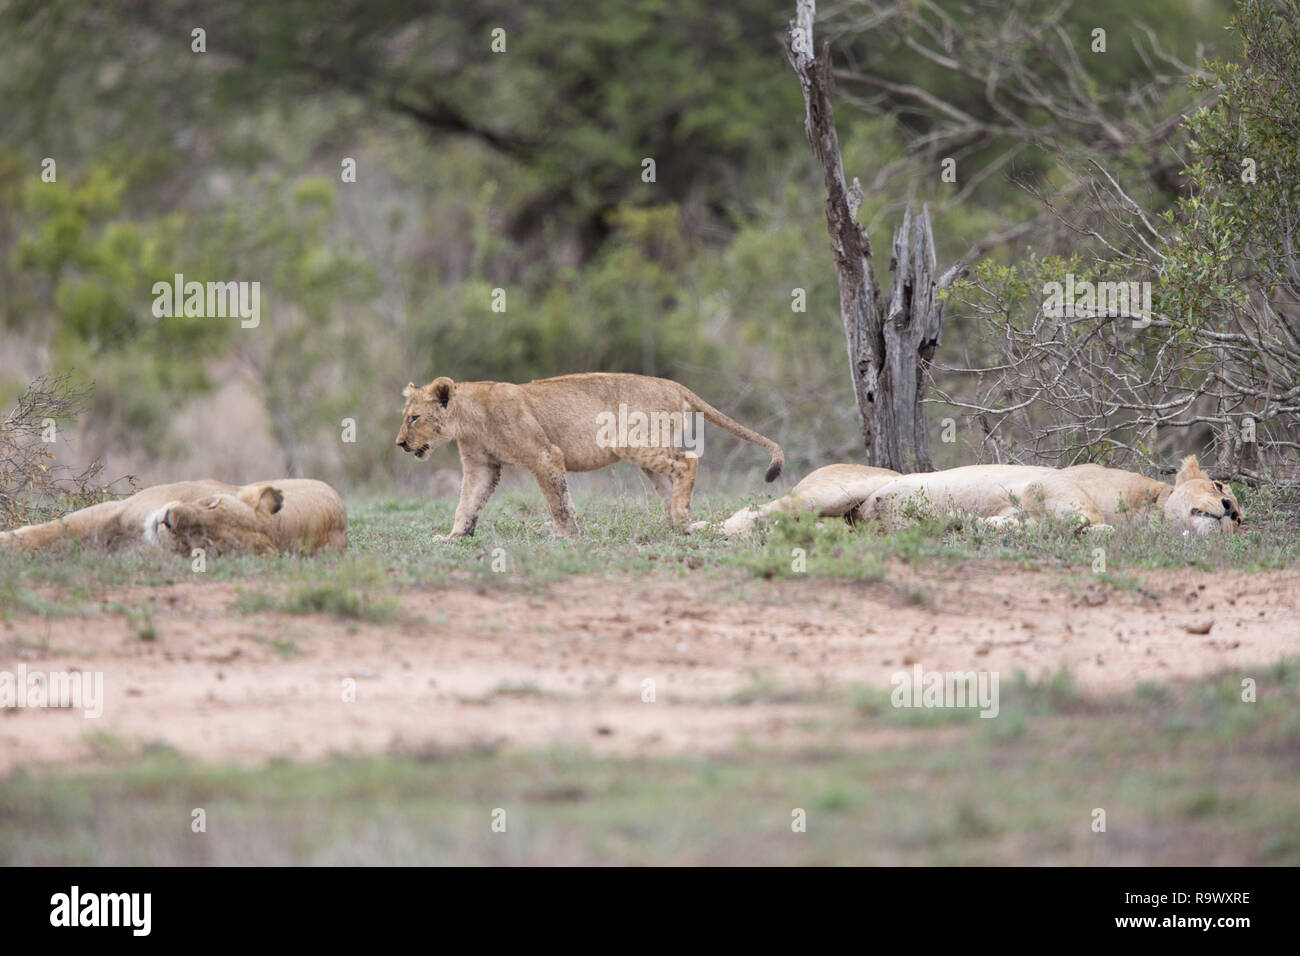 Lion cub walks between two sleeping lioness, Kruger National Park, South Africa. Stock Photo